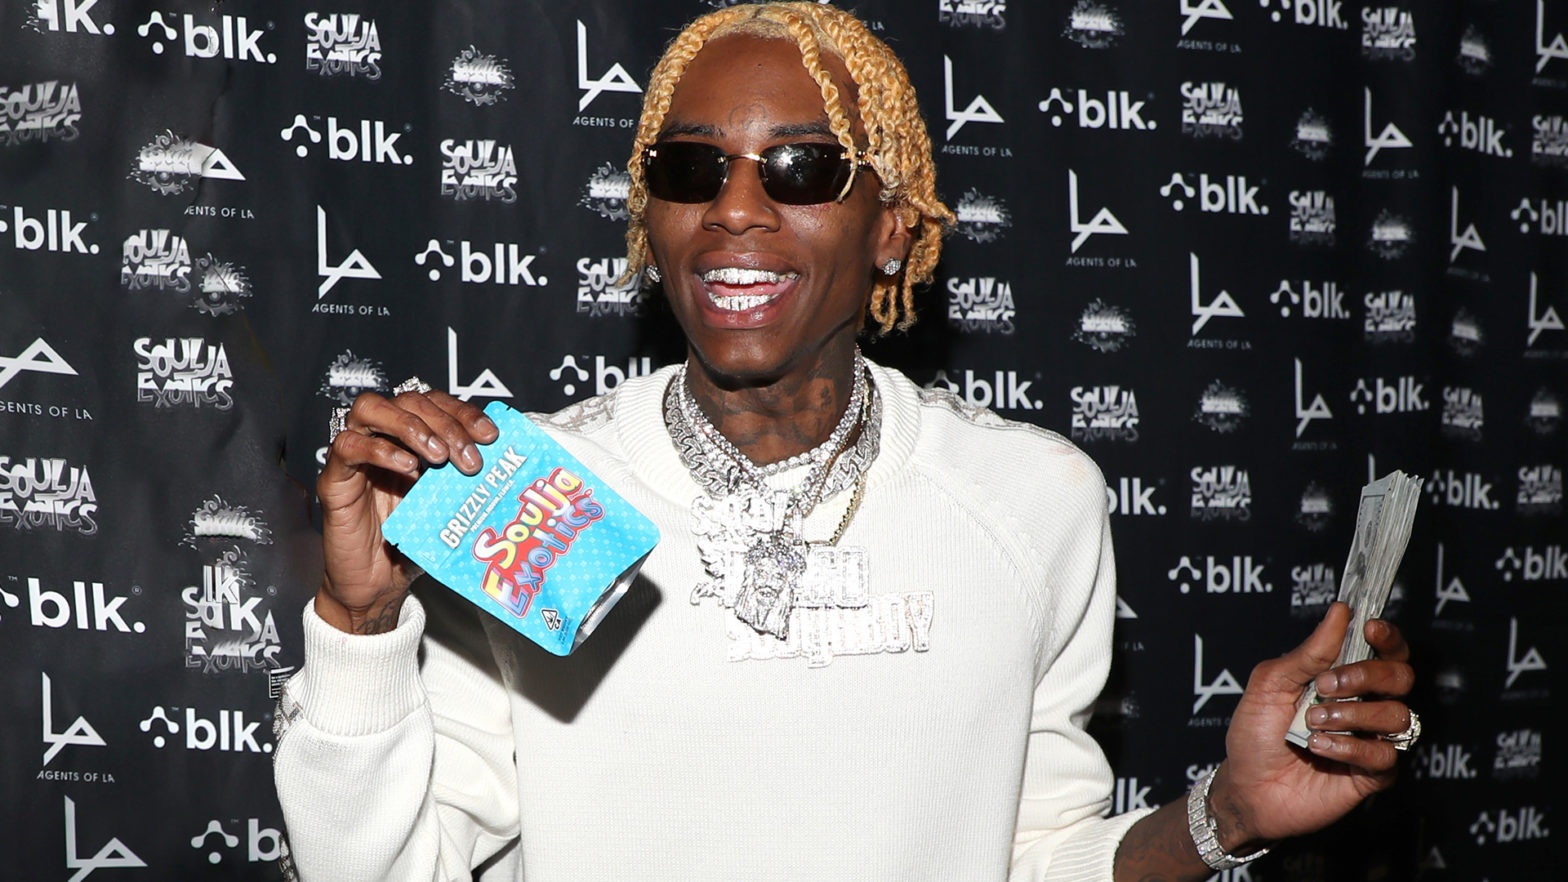 Soulja Boy Joins The Latest Wave Of Rappers To Launch His Own Cannabis Brand